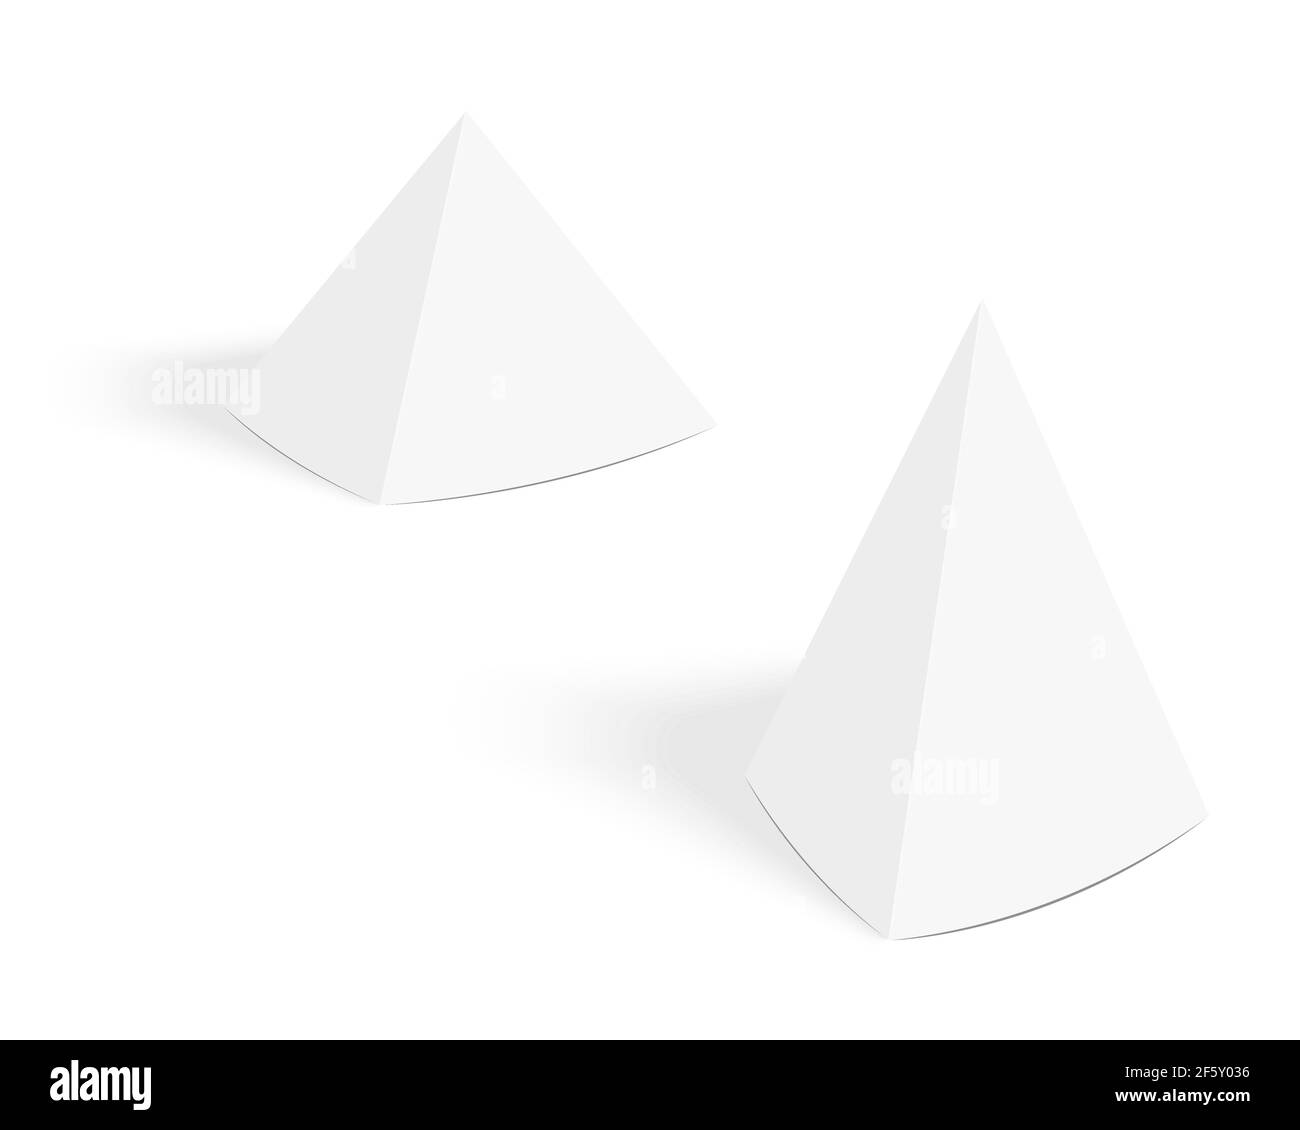 White pyramid tent cards mockup. Table talker template with shadow. Paper or cardboard pyramid display stand isolated on white background. Vector realistic illustration. Stock Vector